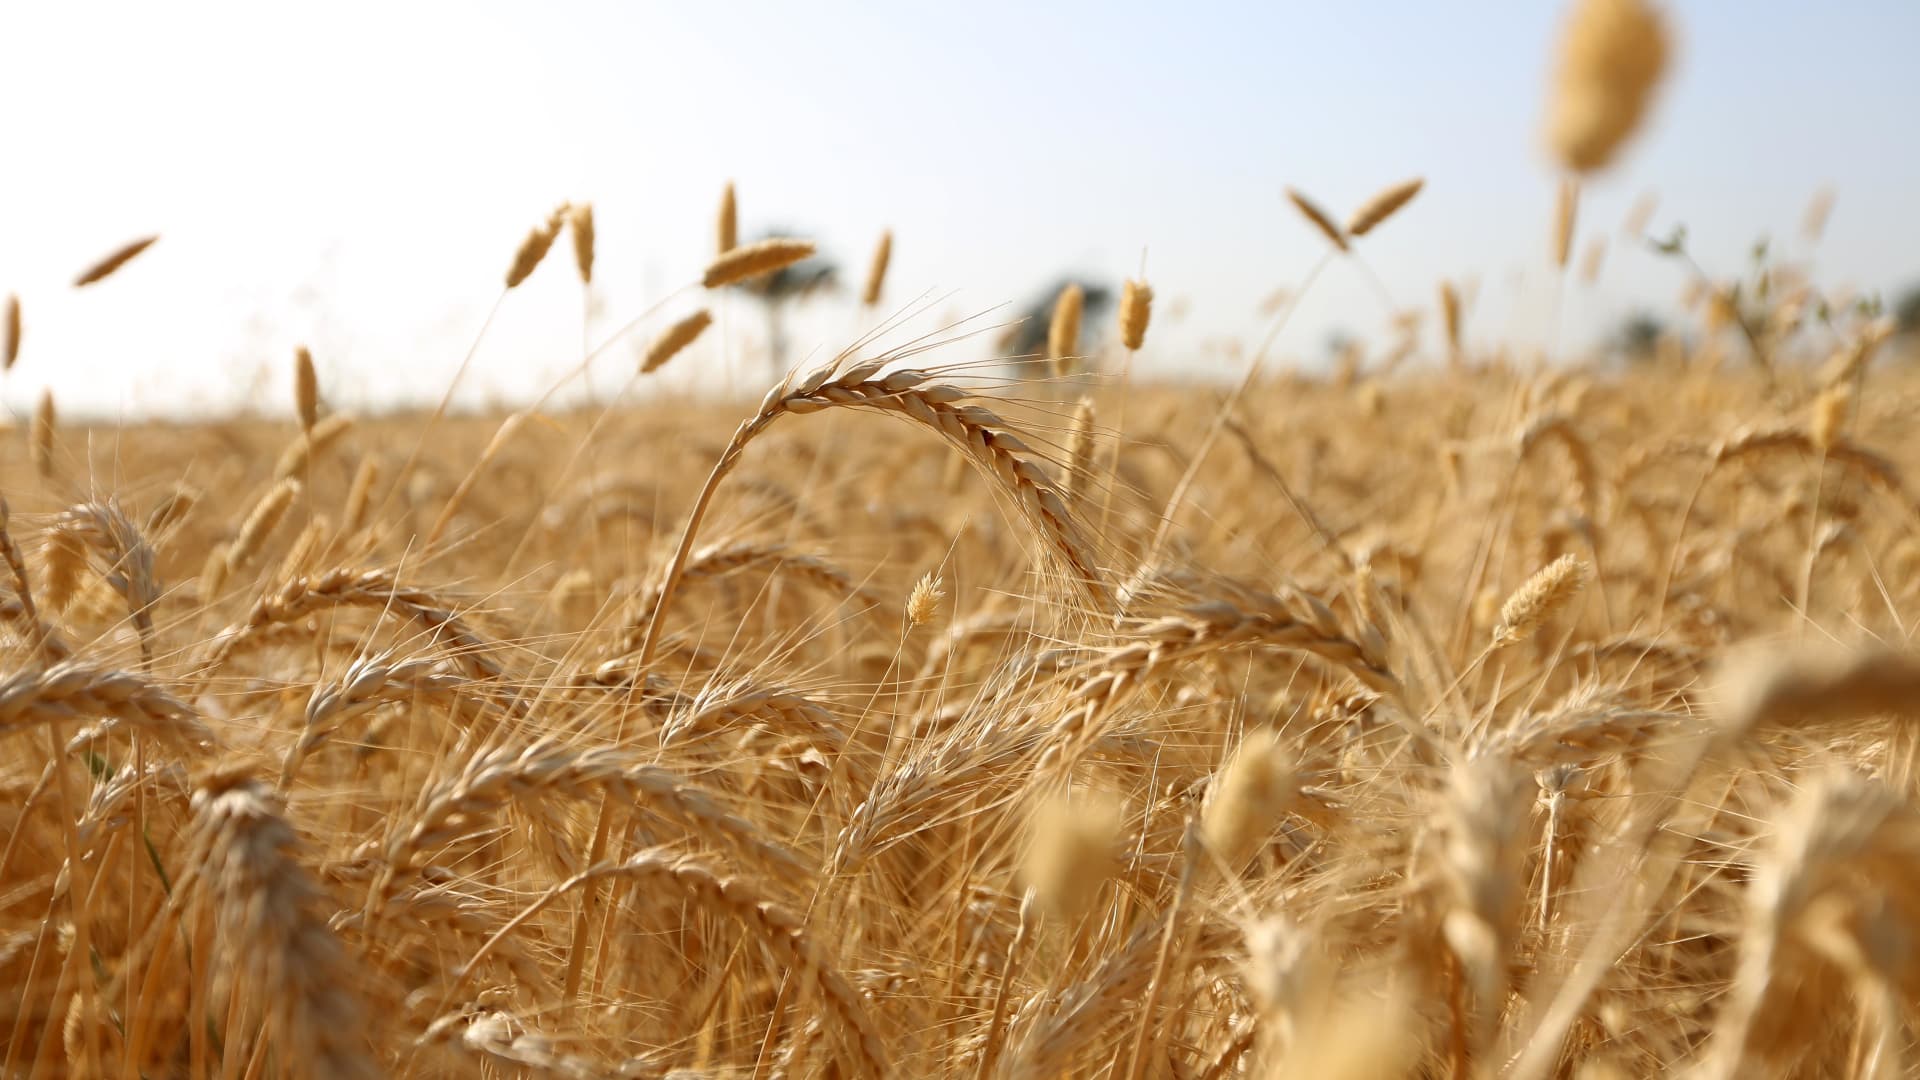 A view of some wheat in a field on May 6, 2022 in Egypt. Ukraine is warning countries that Russian grain exports may contain stolen Ukrainian grain, and anyone that knowingly purchases stolen grain or is involved in the process is considered complicit in the crime.